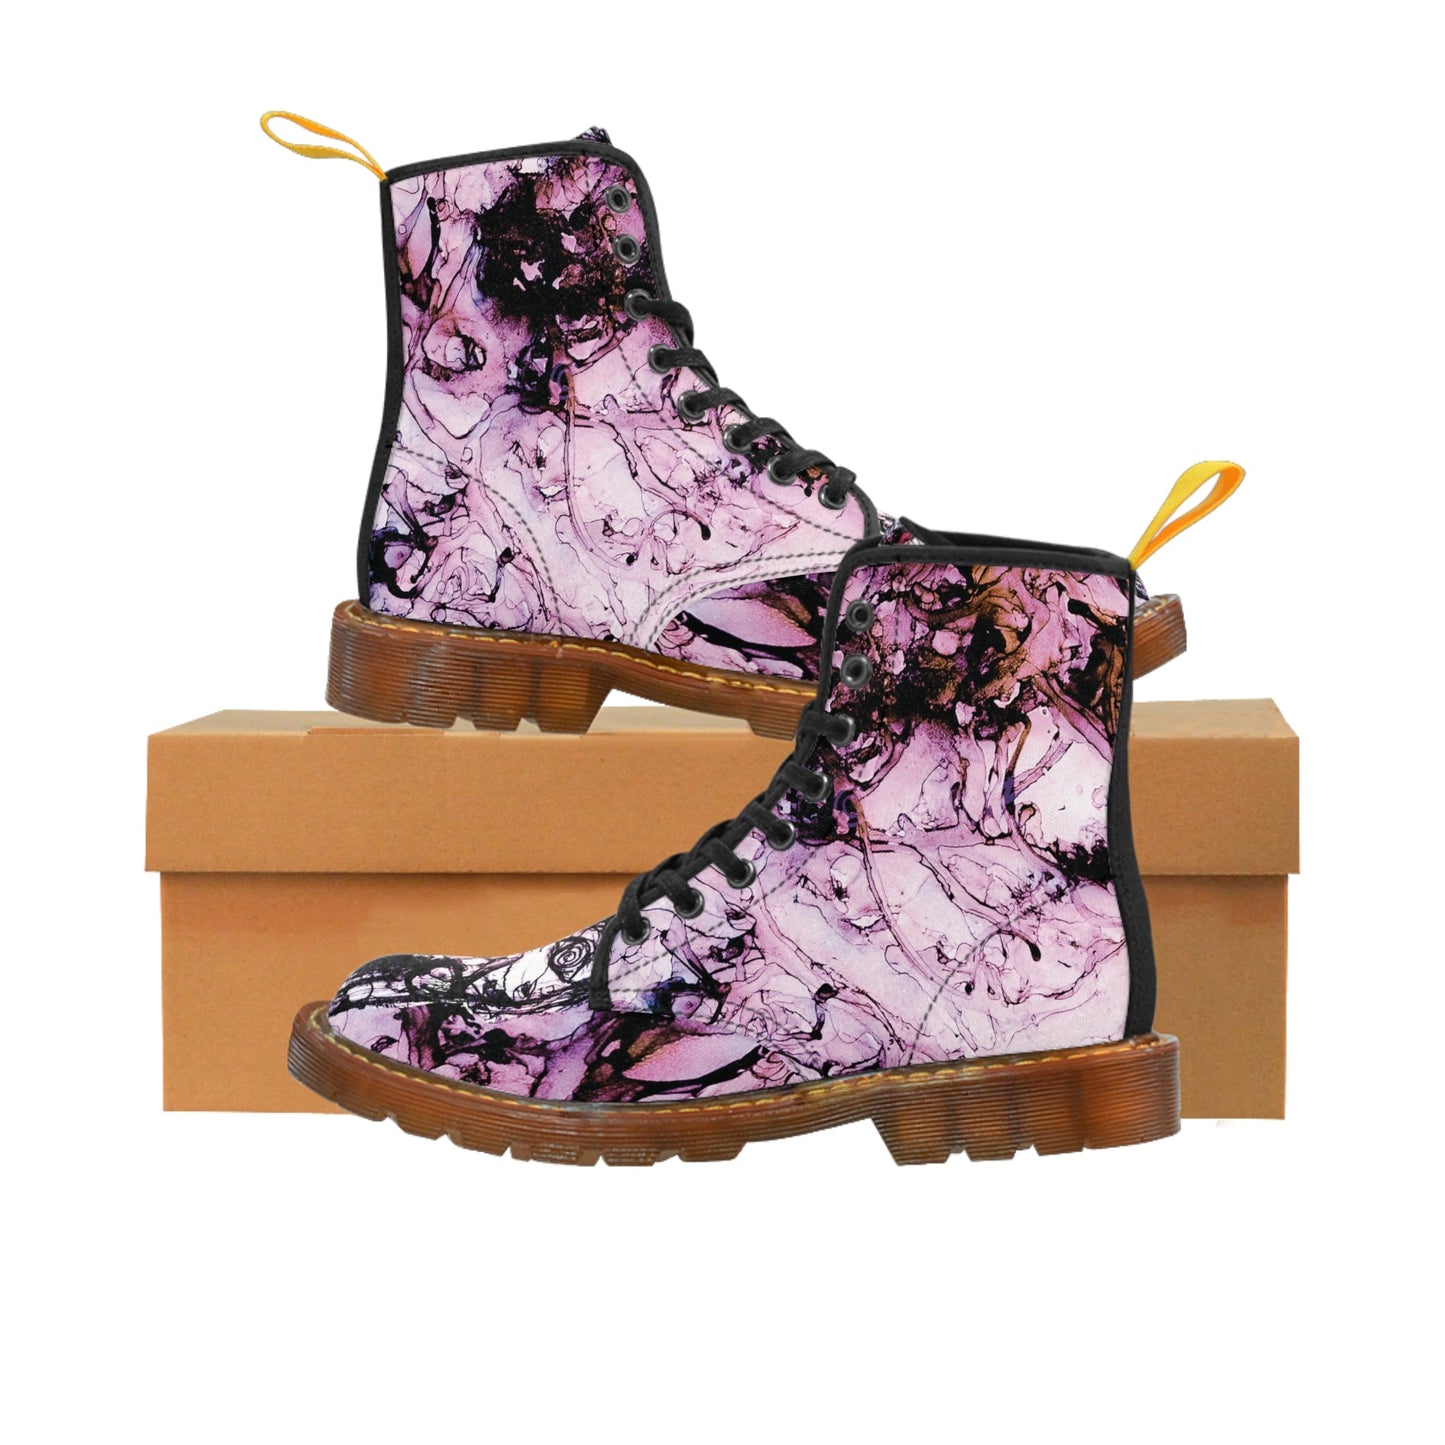 "The Scream" Women's Canvas Boots - Pink - MateART